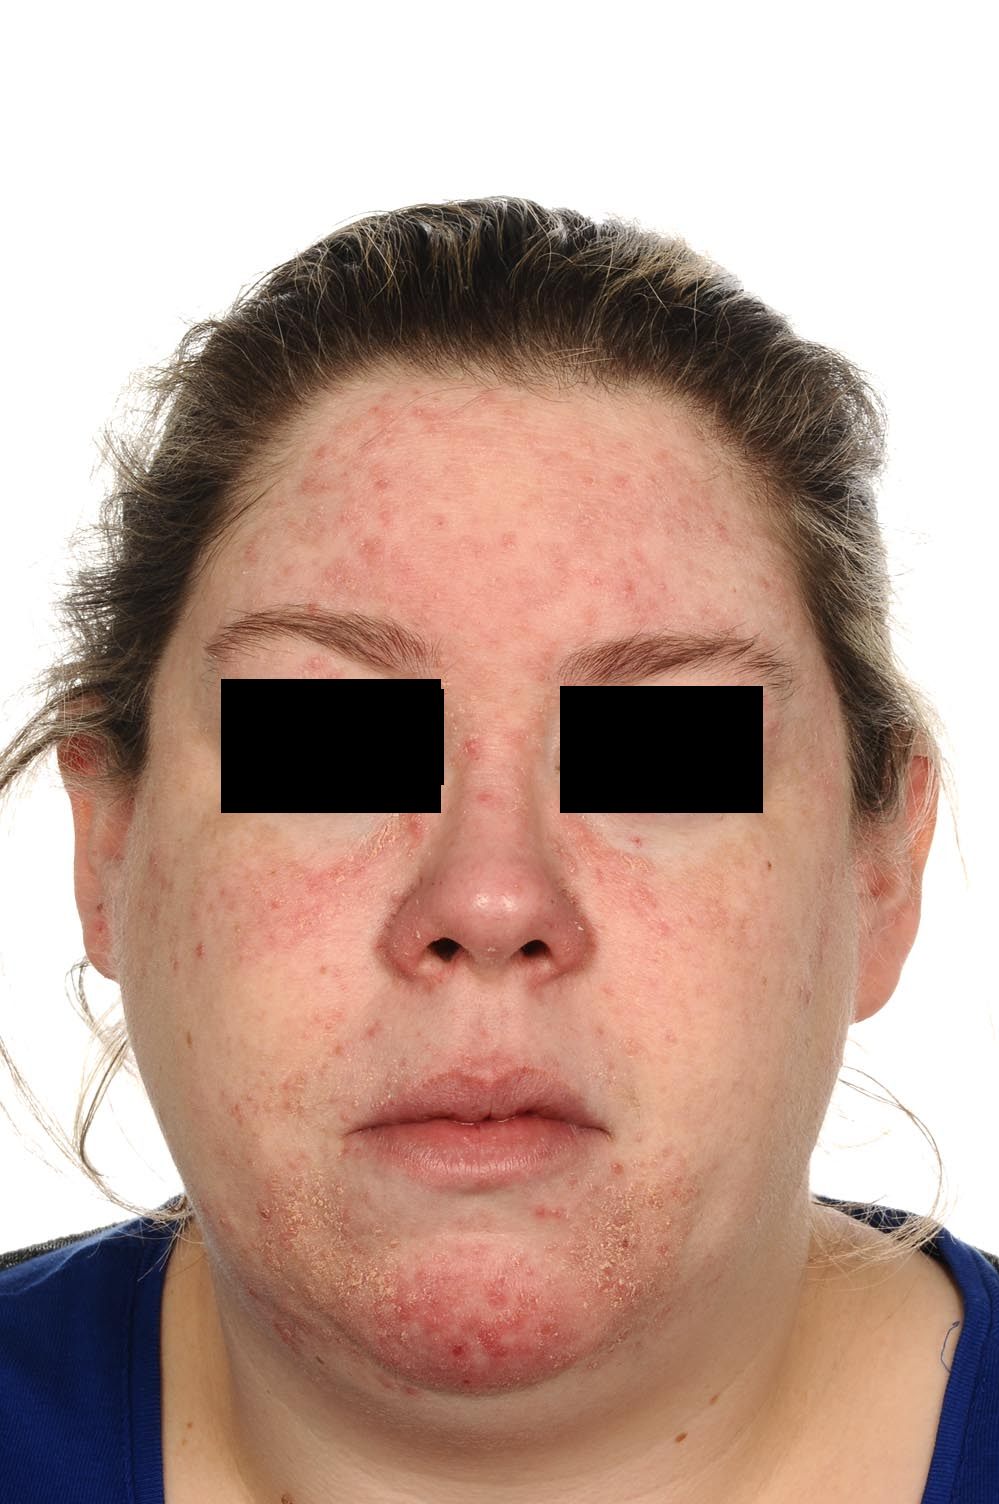 Red spots on the face -rosacea